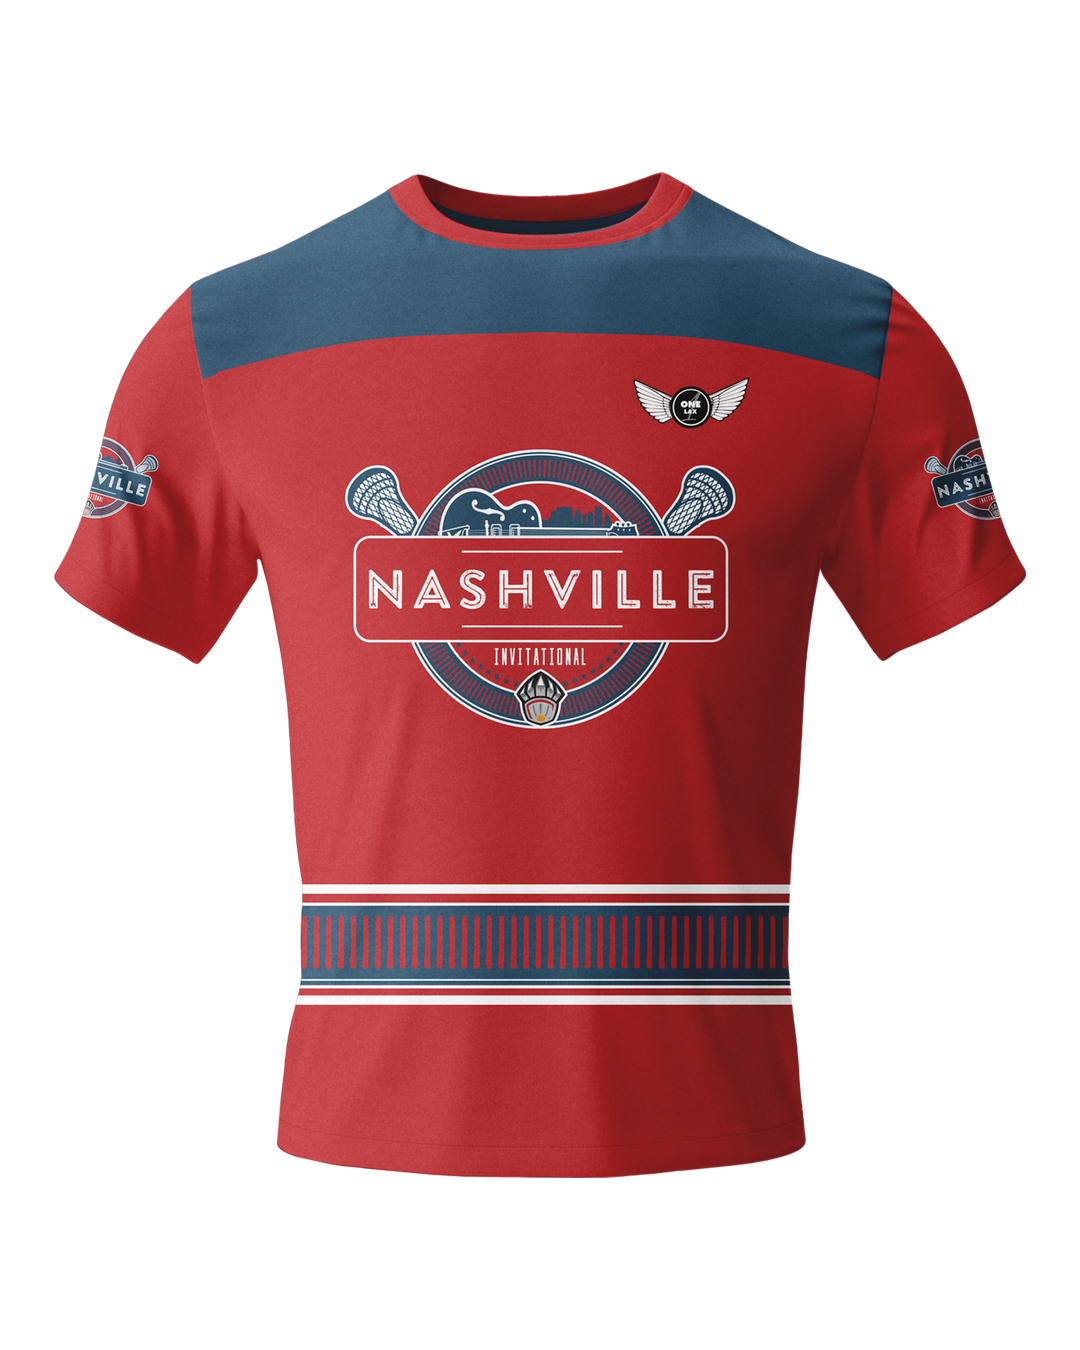 One Lax Nashville Dry Fit Tee - One Lax